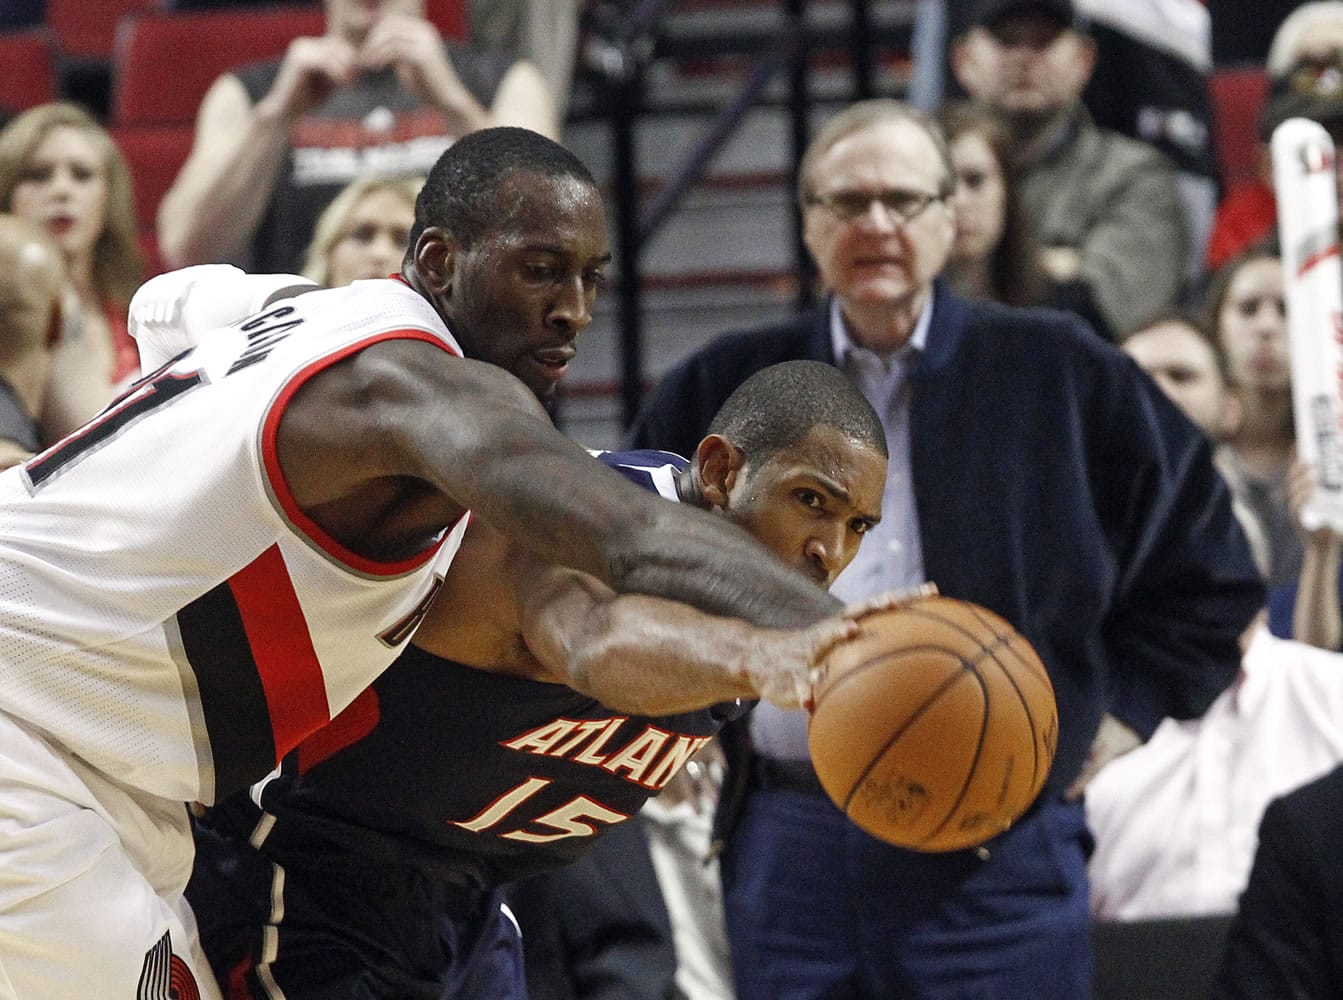 Portland Trail Blazers center J.J. Hickson, left, and Atlanta Hawks forward Al Horford battle for the ball during the second half Monday.